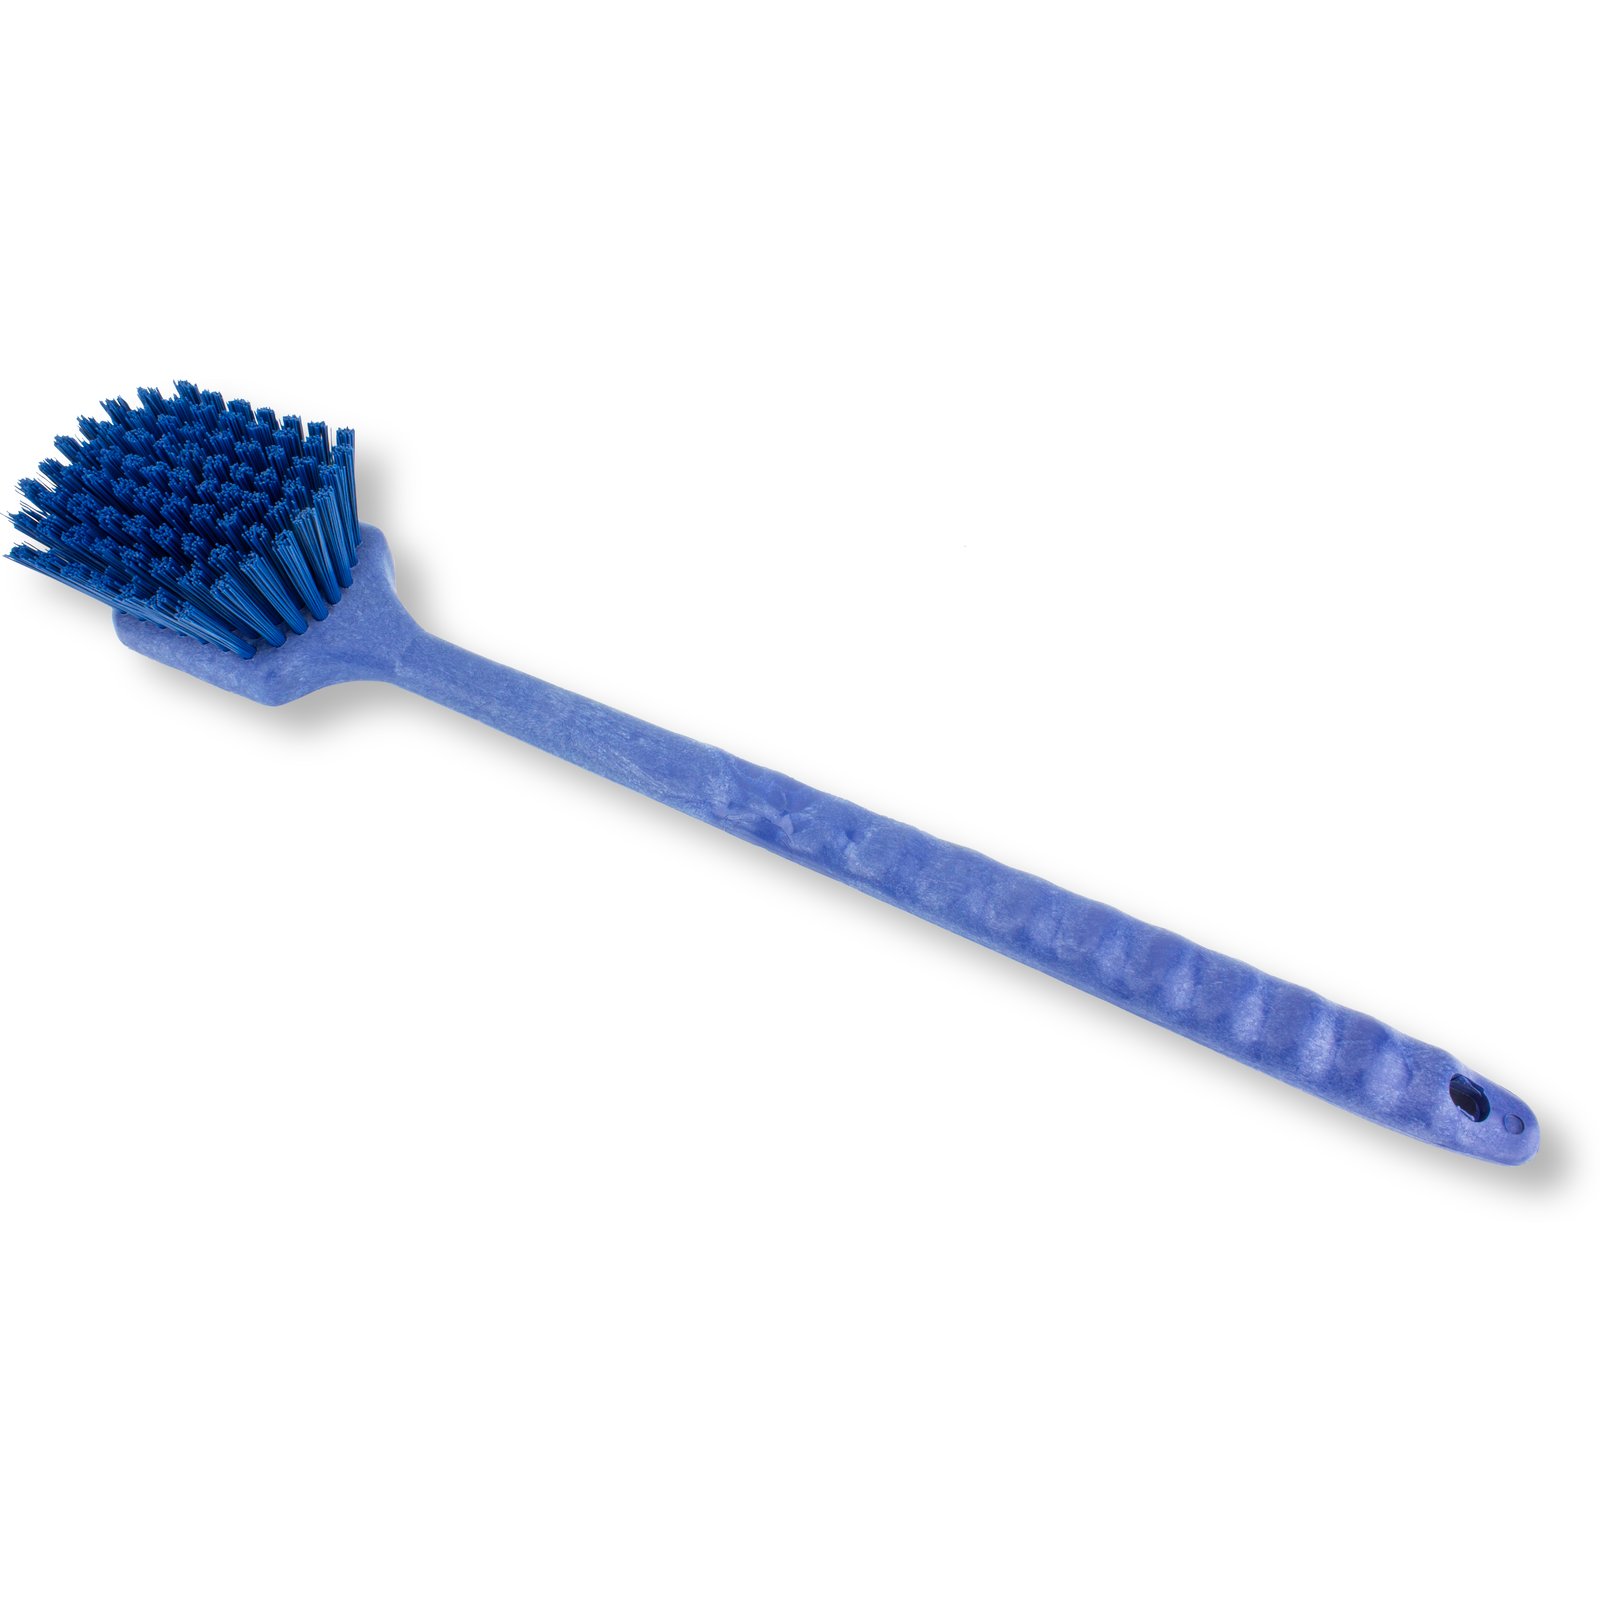 Tube Cleaning Brush, Blue Nylon, Brushes & Specialty Tools